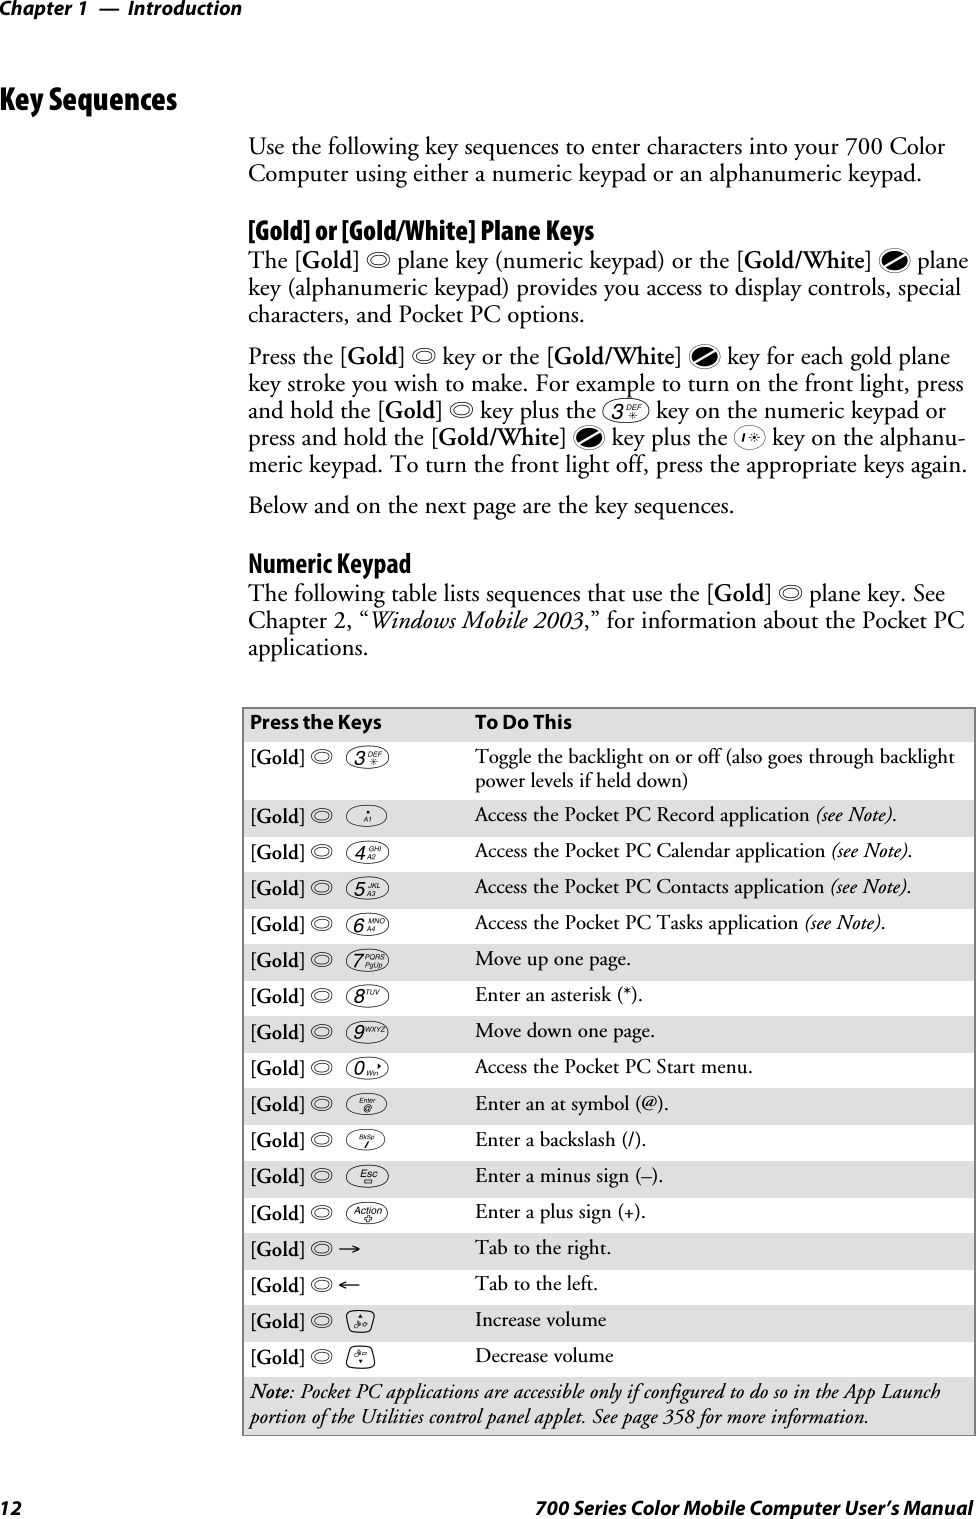 IntroductionChapter —112 700 Series Color Mobile Computer User’s ManualKey SequencesUse the following key sequences to enter characters into your 700 ColorComputer using either a numeric keypad or an alphanumeric keypad.[Gold] or [Gold/White] Plane KeysThe [Gold] bplane key (numeric keypad) or the [Gold/White] cplanekey (alphanumeric keypad) provides you access to display controls, specialcharacters, and Pocket PC options.Press the [Gold] bkey or the [Gold/White] ckey for each gold planekey stroke you wish to make. For example to turn on the front light, pressandholdthe[Gold] bkey plus the 3key on the numeric keypad orpress and hold the [Gold/White] ckey plus the Ikey on the alphanu-meric keypad. To turn the front light off, press the appropriate keys again.Belowandonthenextpagearethekeysequences.Numeric KeypadThe following table lists sequences that use the [Gold] bplane key. SeeChapter 2, “Windows Mobile 2003,” for information about the Pocket PCapplications.Press the Keys To Do This[Gold]b3Toggle the backlight on or off (also goes through backlightpower levels if held down)[Gold]baAccess the Pocket PC Record application (see Note).[Gold]b4Access the Pocket PC Calendar application (see Note).[Gold]b5Access the Pocket PC Contacts application (see Note).[Gold]b6Access the Pocket PC Tasks application (see Note).[Gold]b7Move up one page.[Gold]b8Enter an asterisk (*).[Gold]b9Move down one page.[Gold]b0Access the Pocket PC Start menu.[Gold]beEnter an at symbol (@).[Gold]bKEnter a backslash (/).[Gold]bEEnter a minus sign (–).[Gold]bAEnter a plus sign (+).[Gold]b→Tab to the right.[Gold]b←Tab to the left.[Gold]bUIncrease volume[Gold]bDDecrease volumeNote: Pocket PC applications are accessible only if configured to do so in the App Launchportion of the Utilities control panel applet. See page 358 for more information.